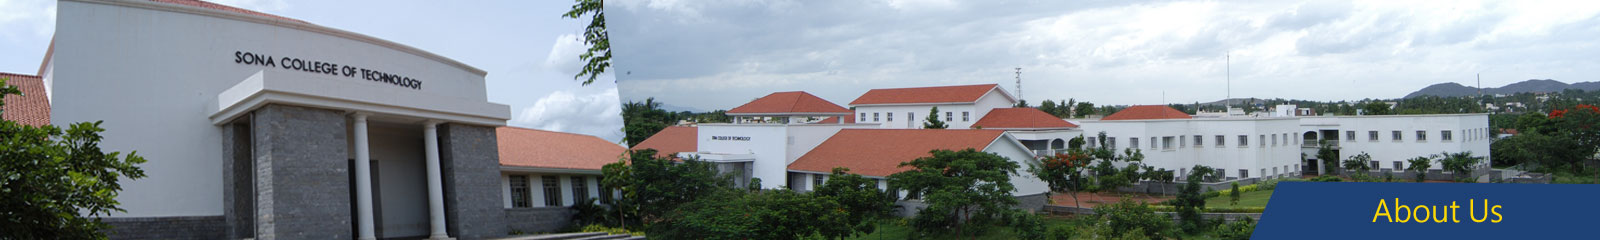 sona college of technology